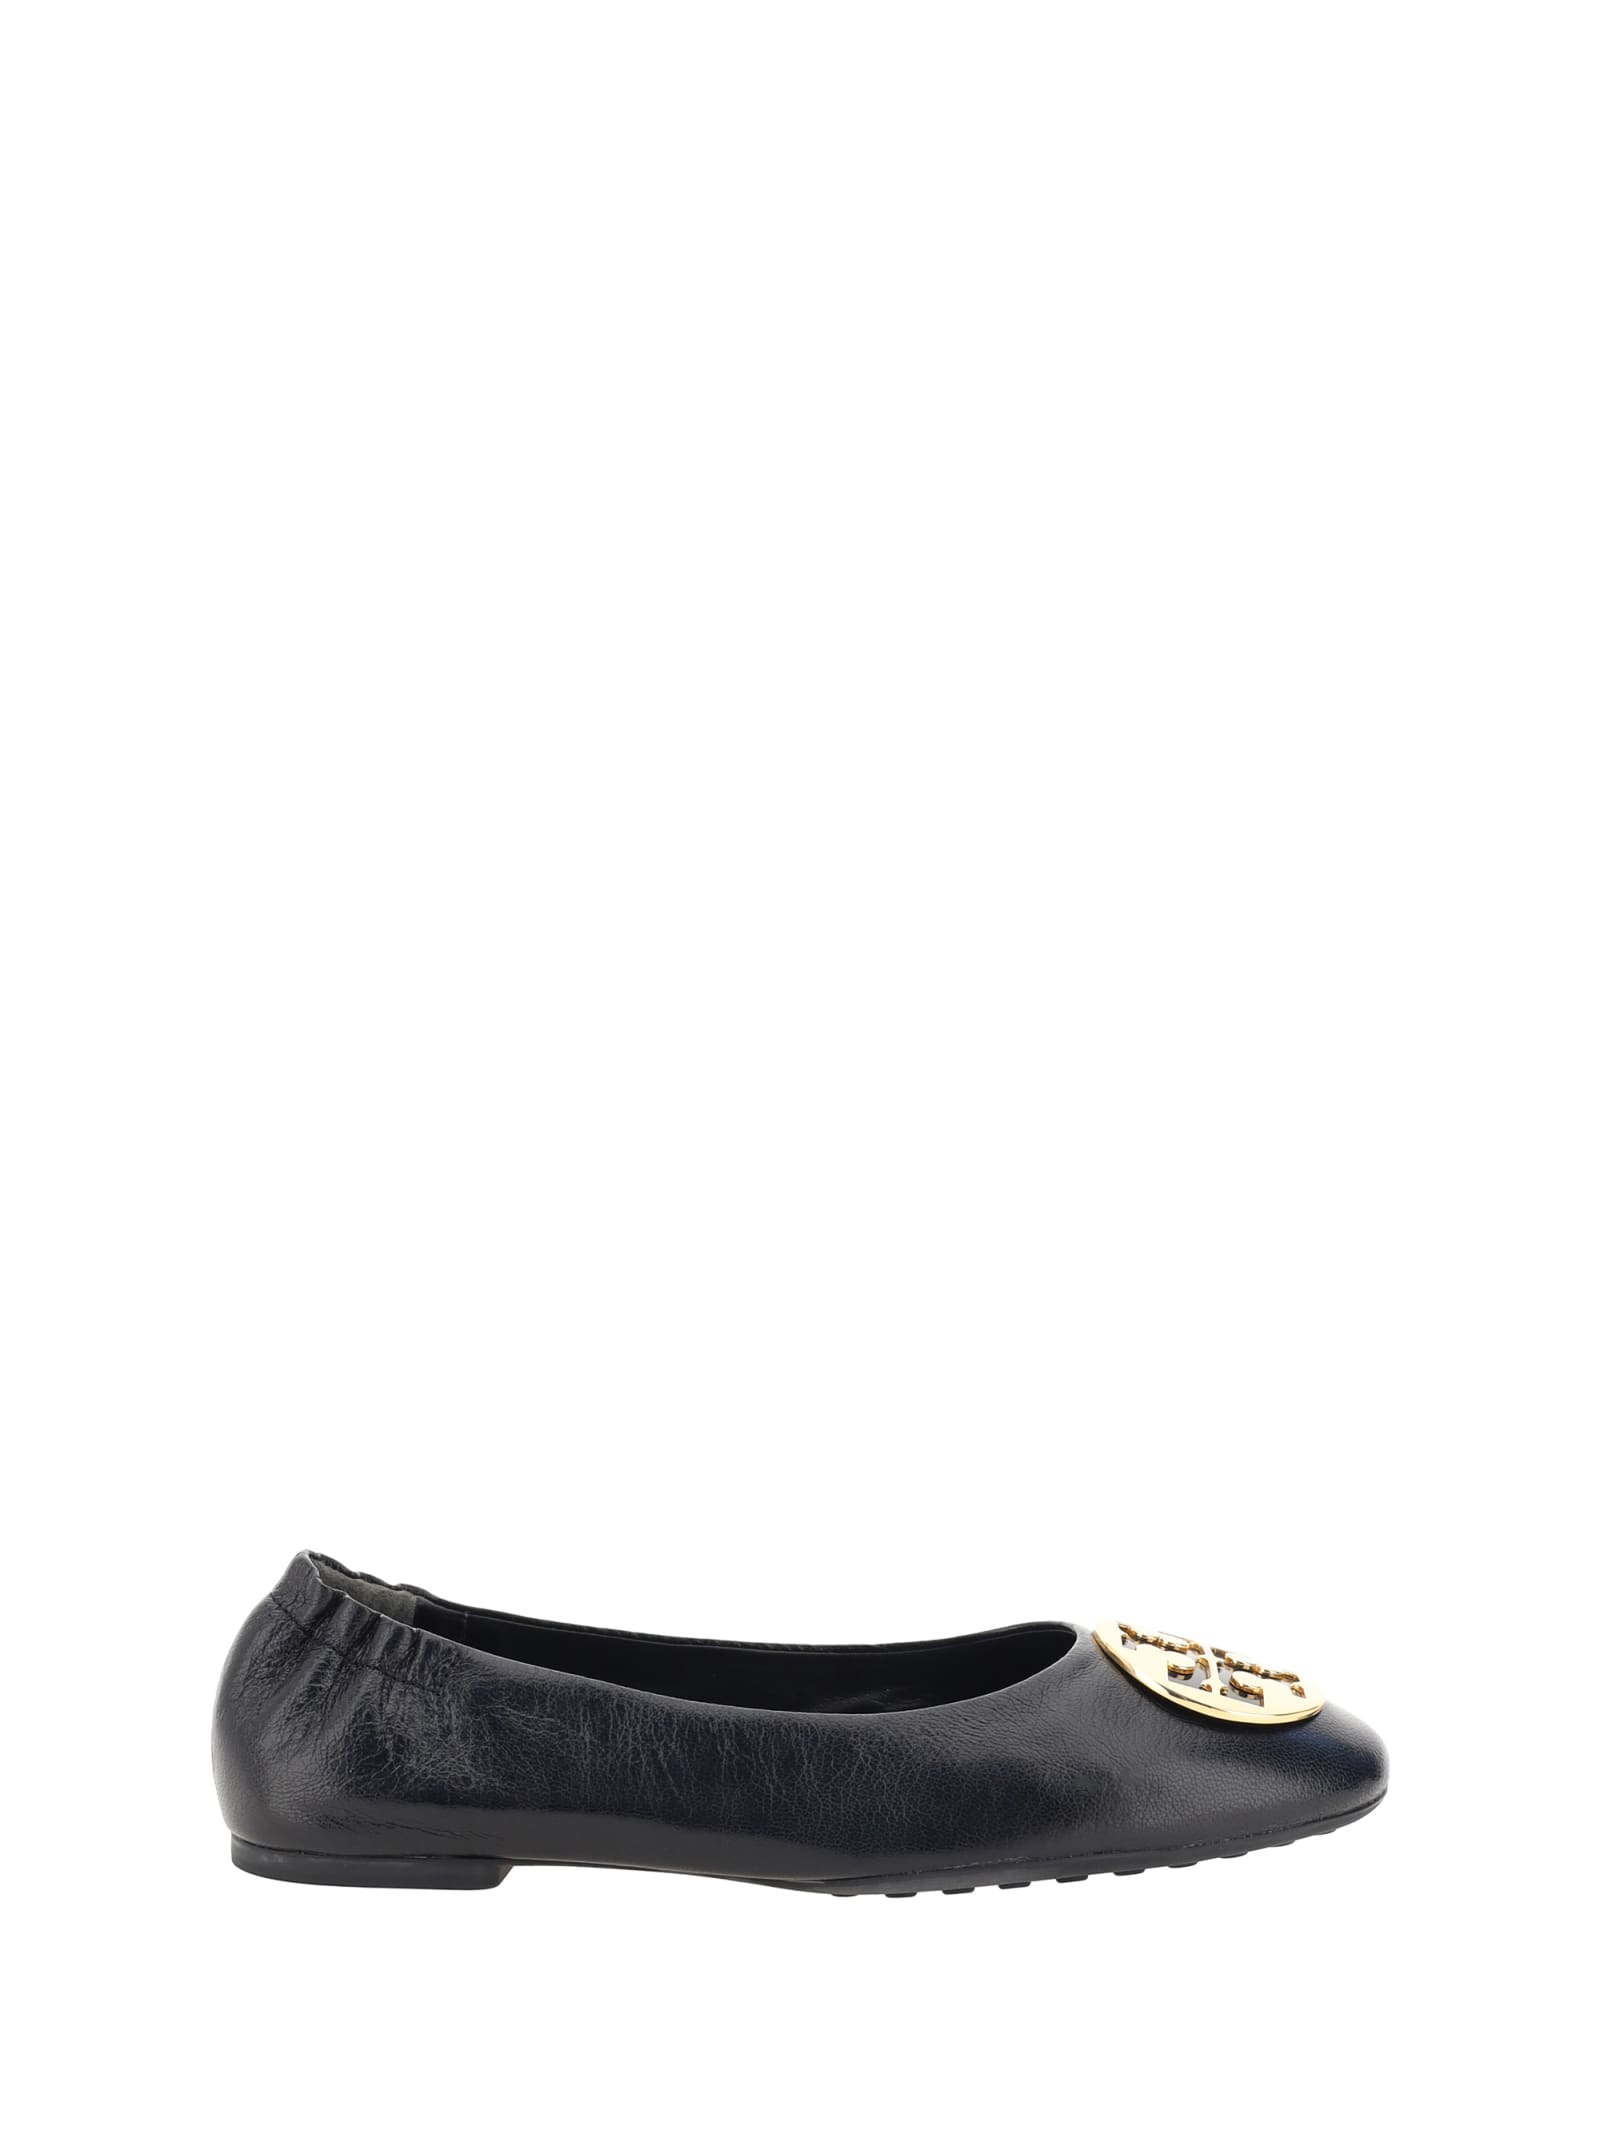 TORY BURCH CLAIRE FLATS